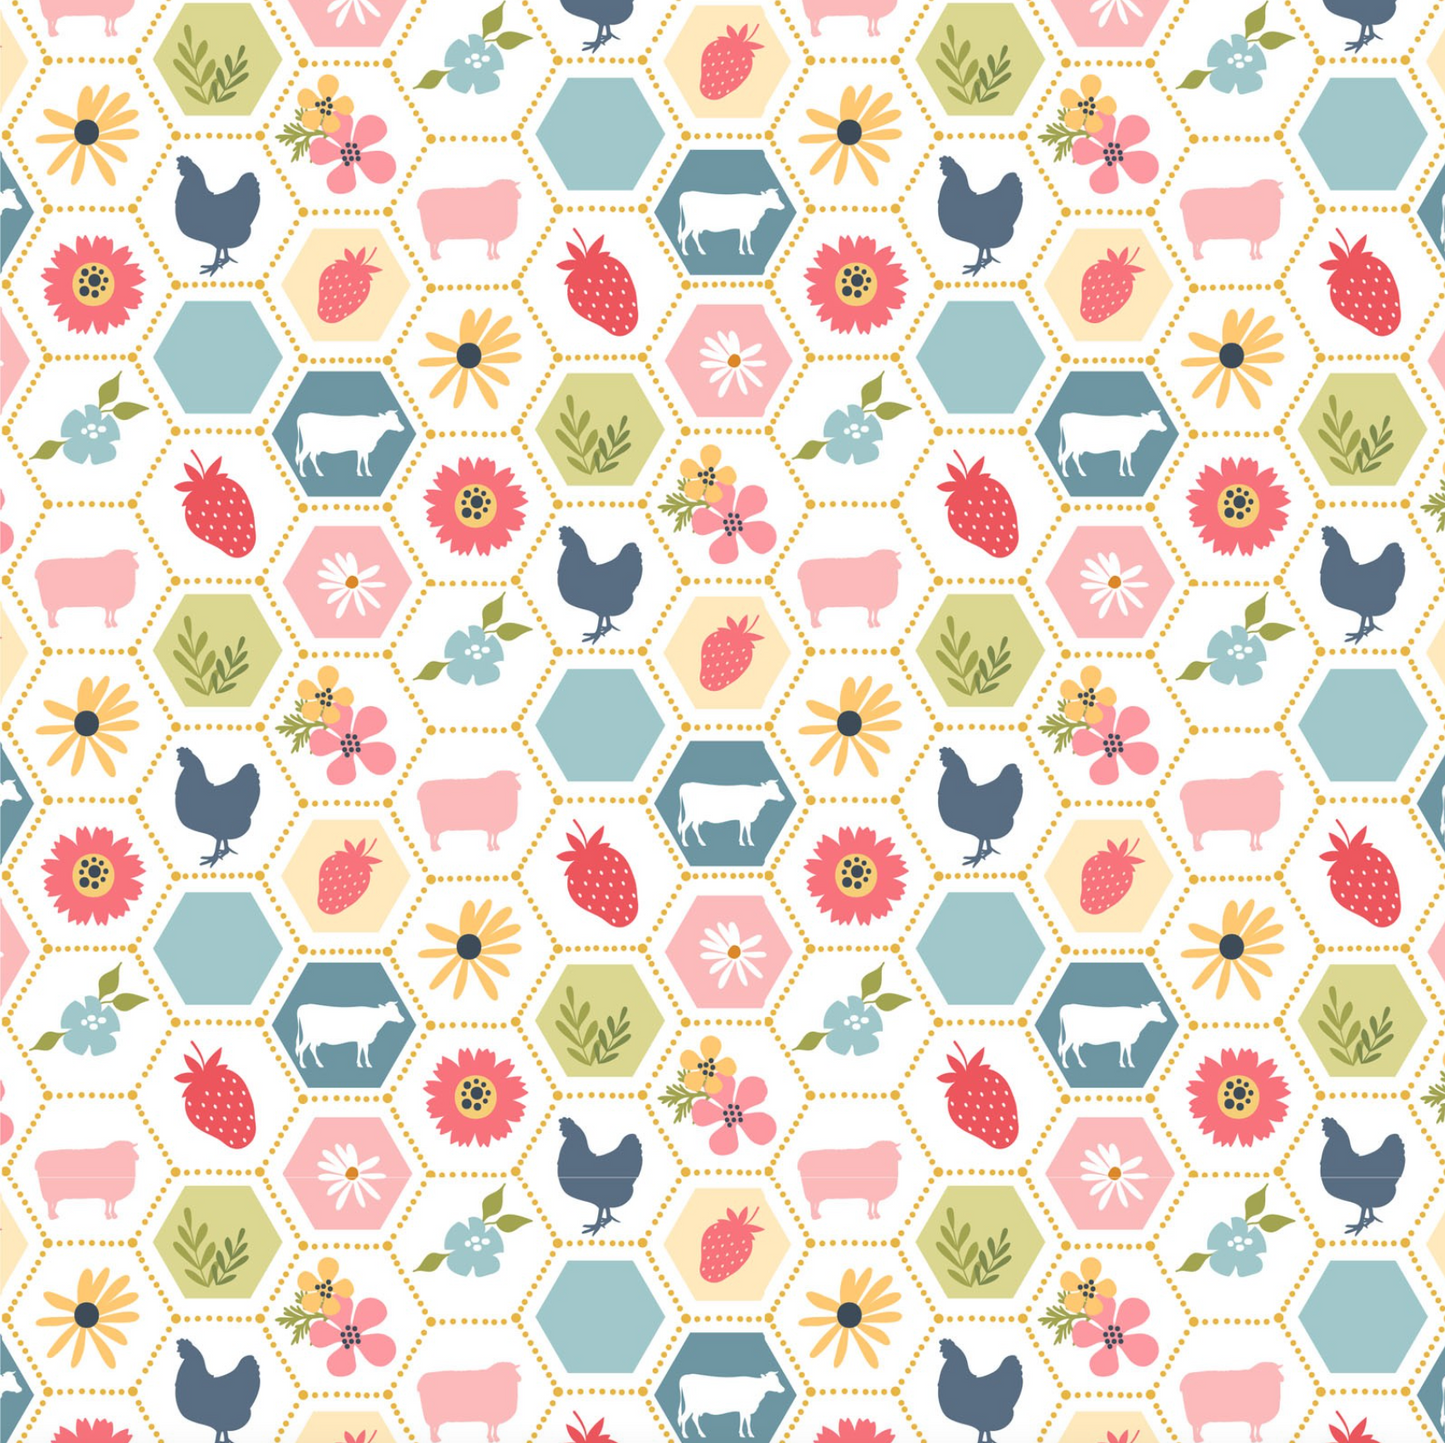 Sunshine & Chamomile, Strawberry Patch, White, SC23501, sold by the 1/2 yard